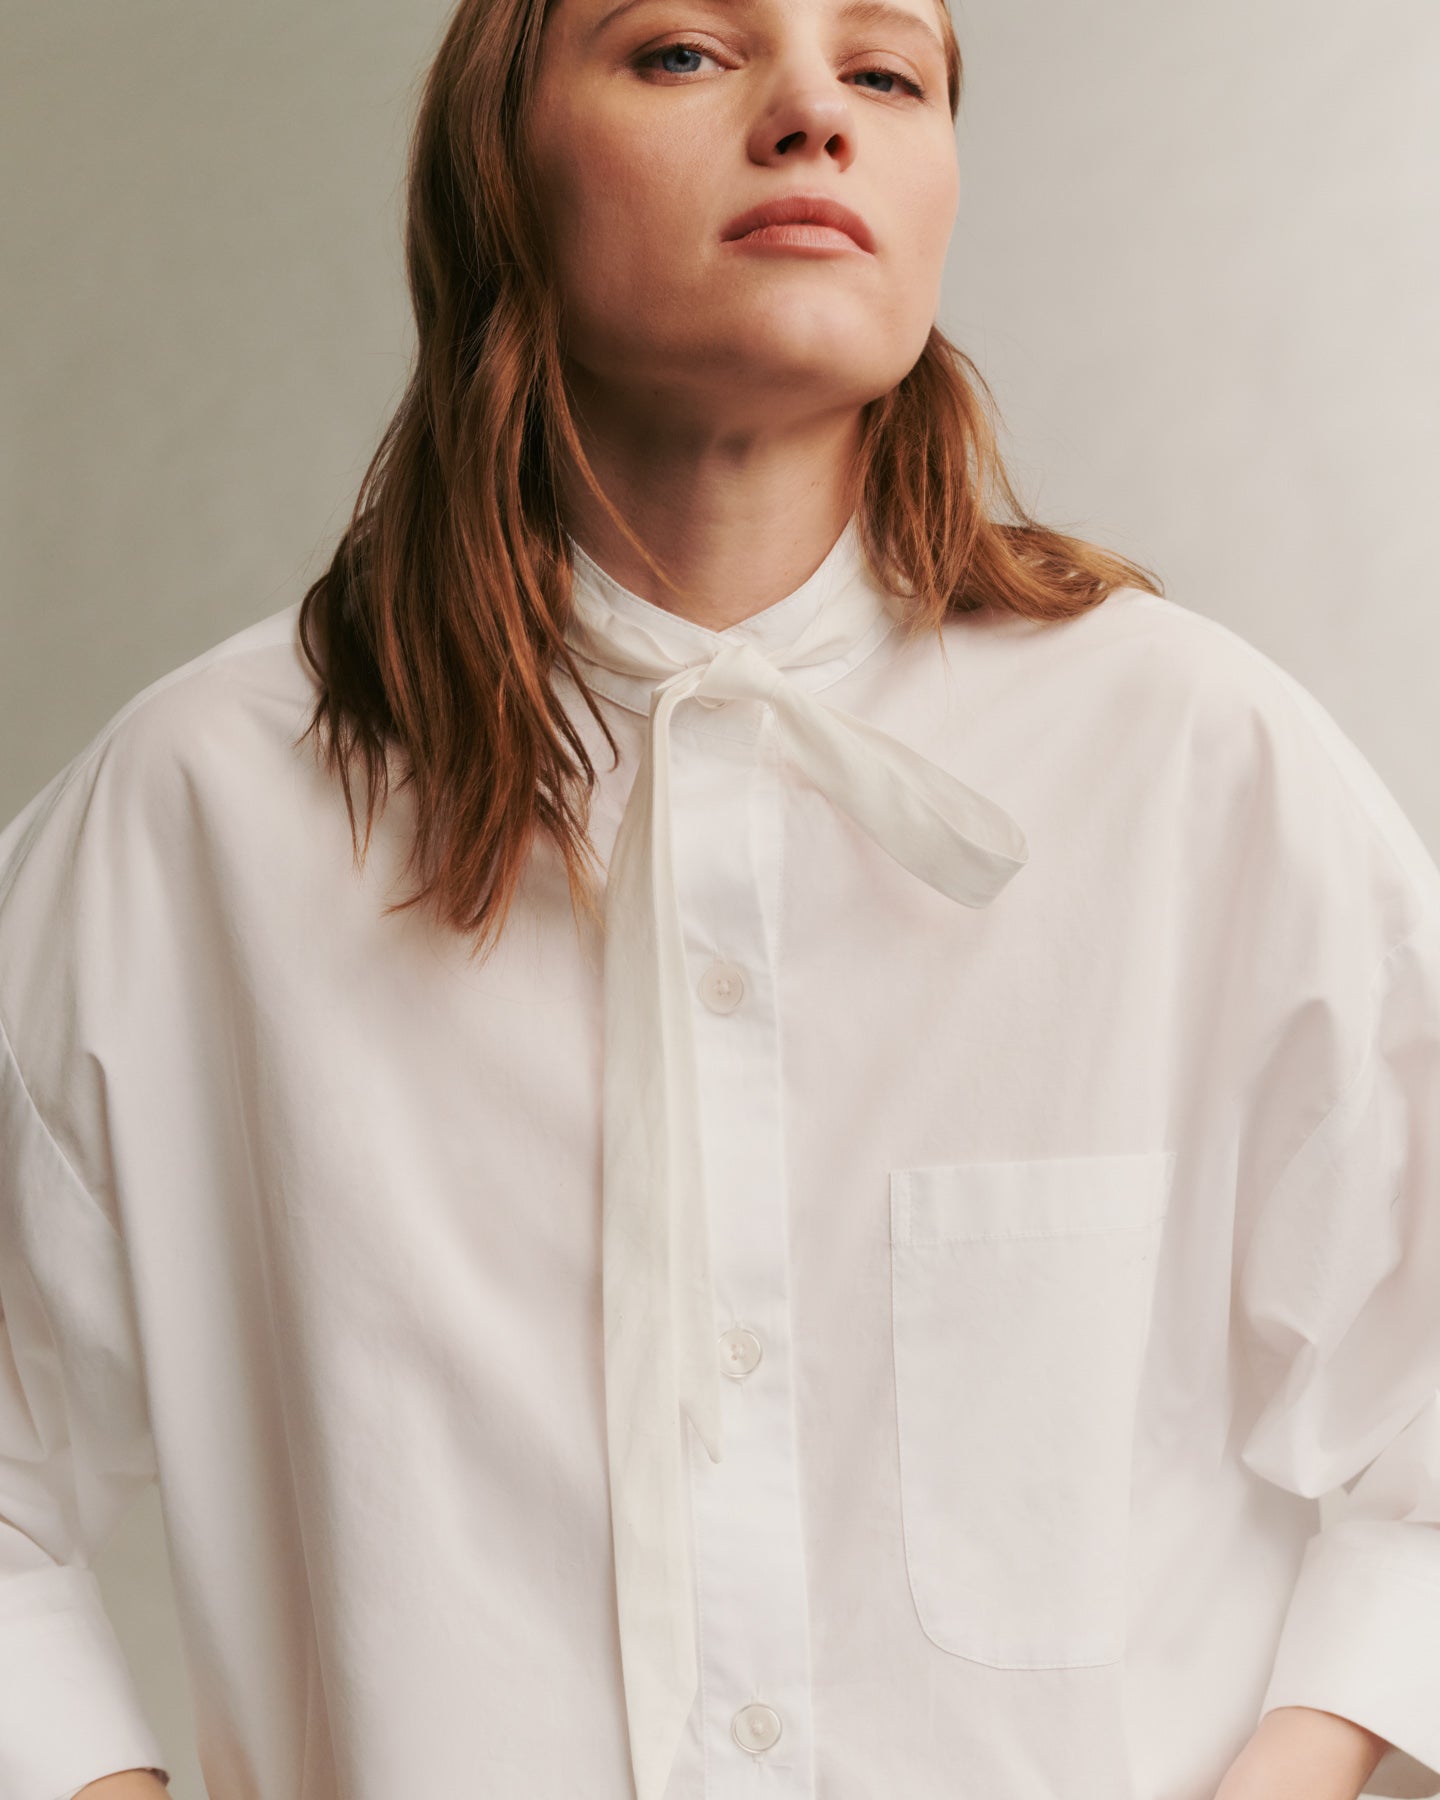 TWP White Darling Shirt in superfine cotton view 5